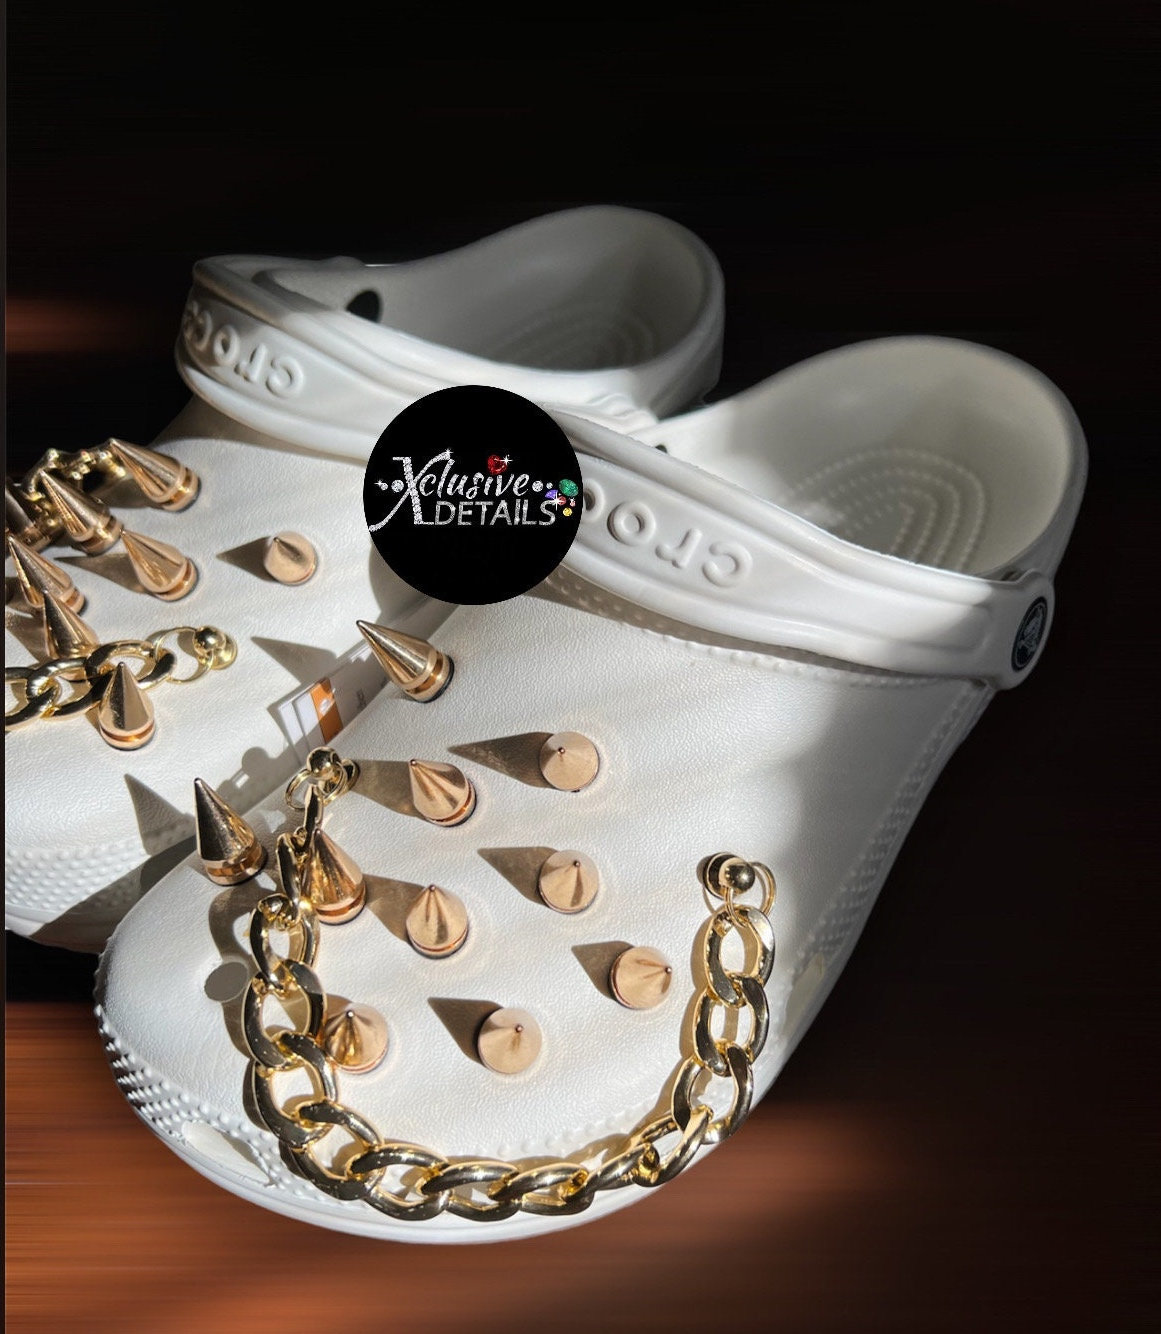 Shoe Charms for Rubber Clogs - Studs - Spikes, Metal, Metallic, Silver  Color, Unique, Spike, Spiky, Stud, Studded, teens, adults, teenager